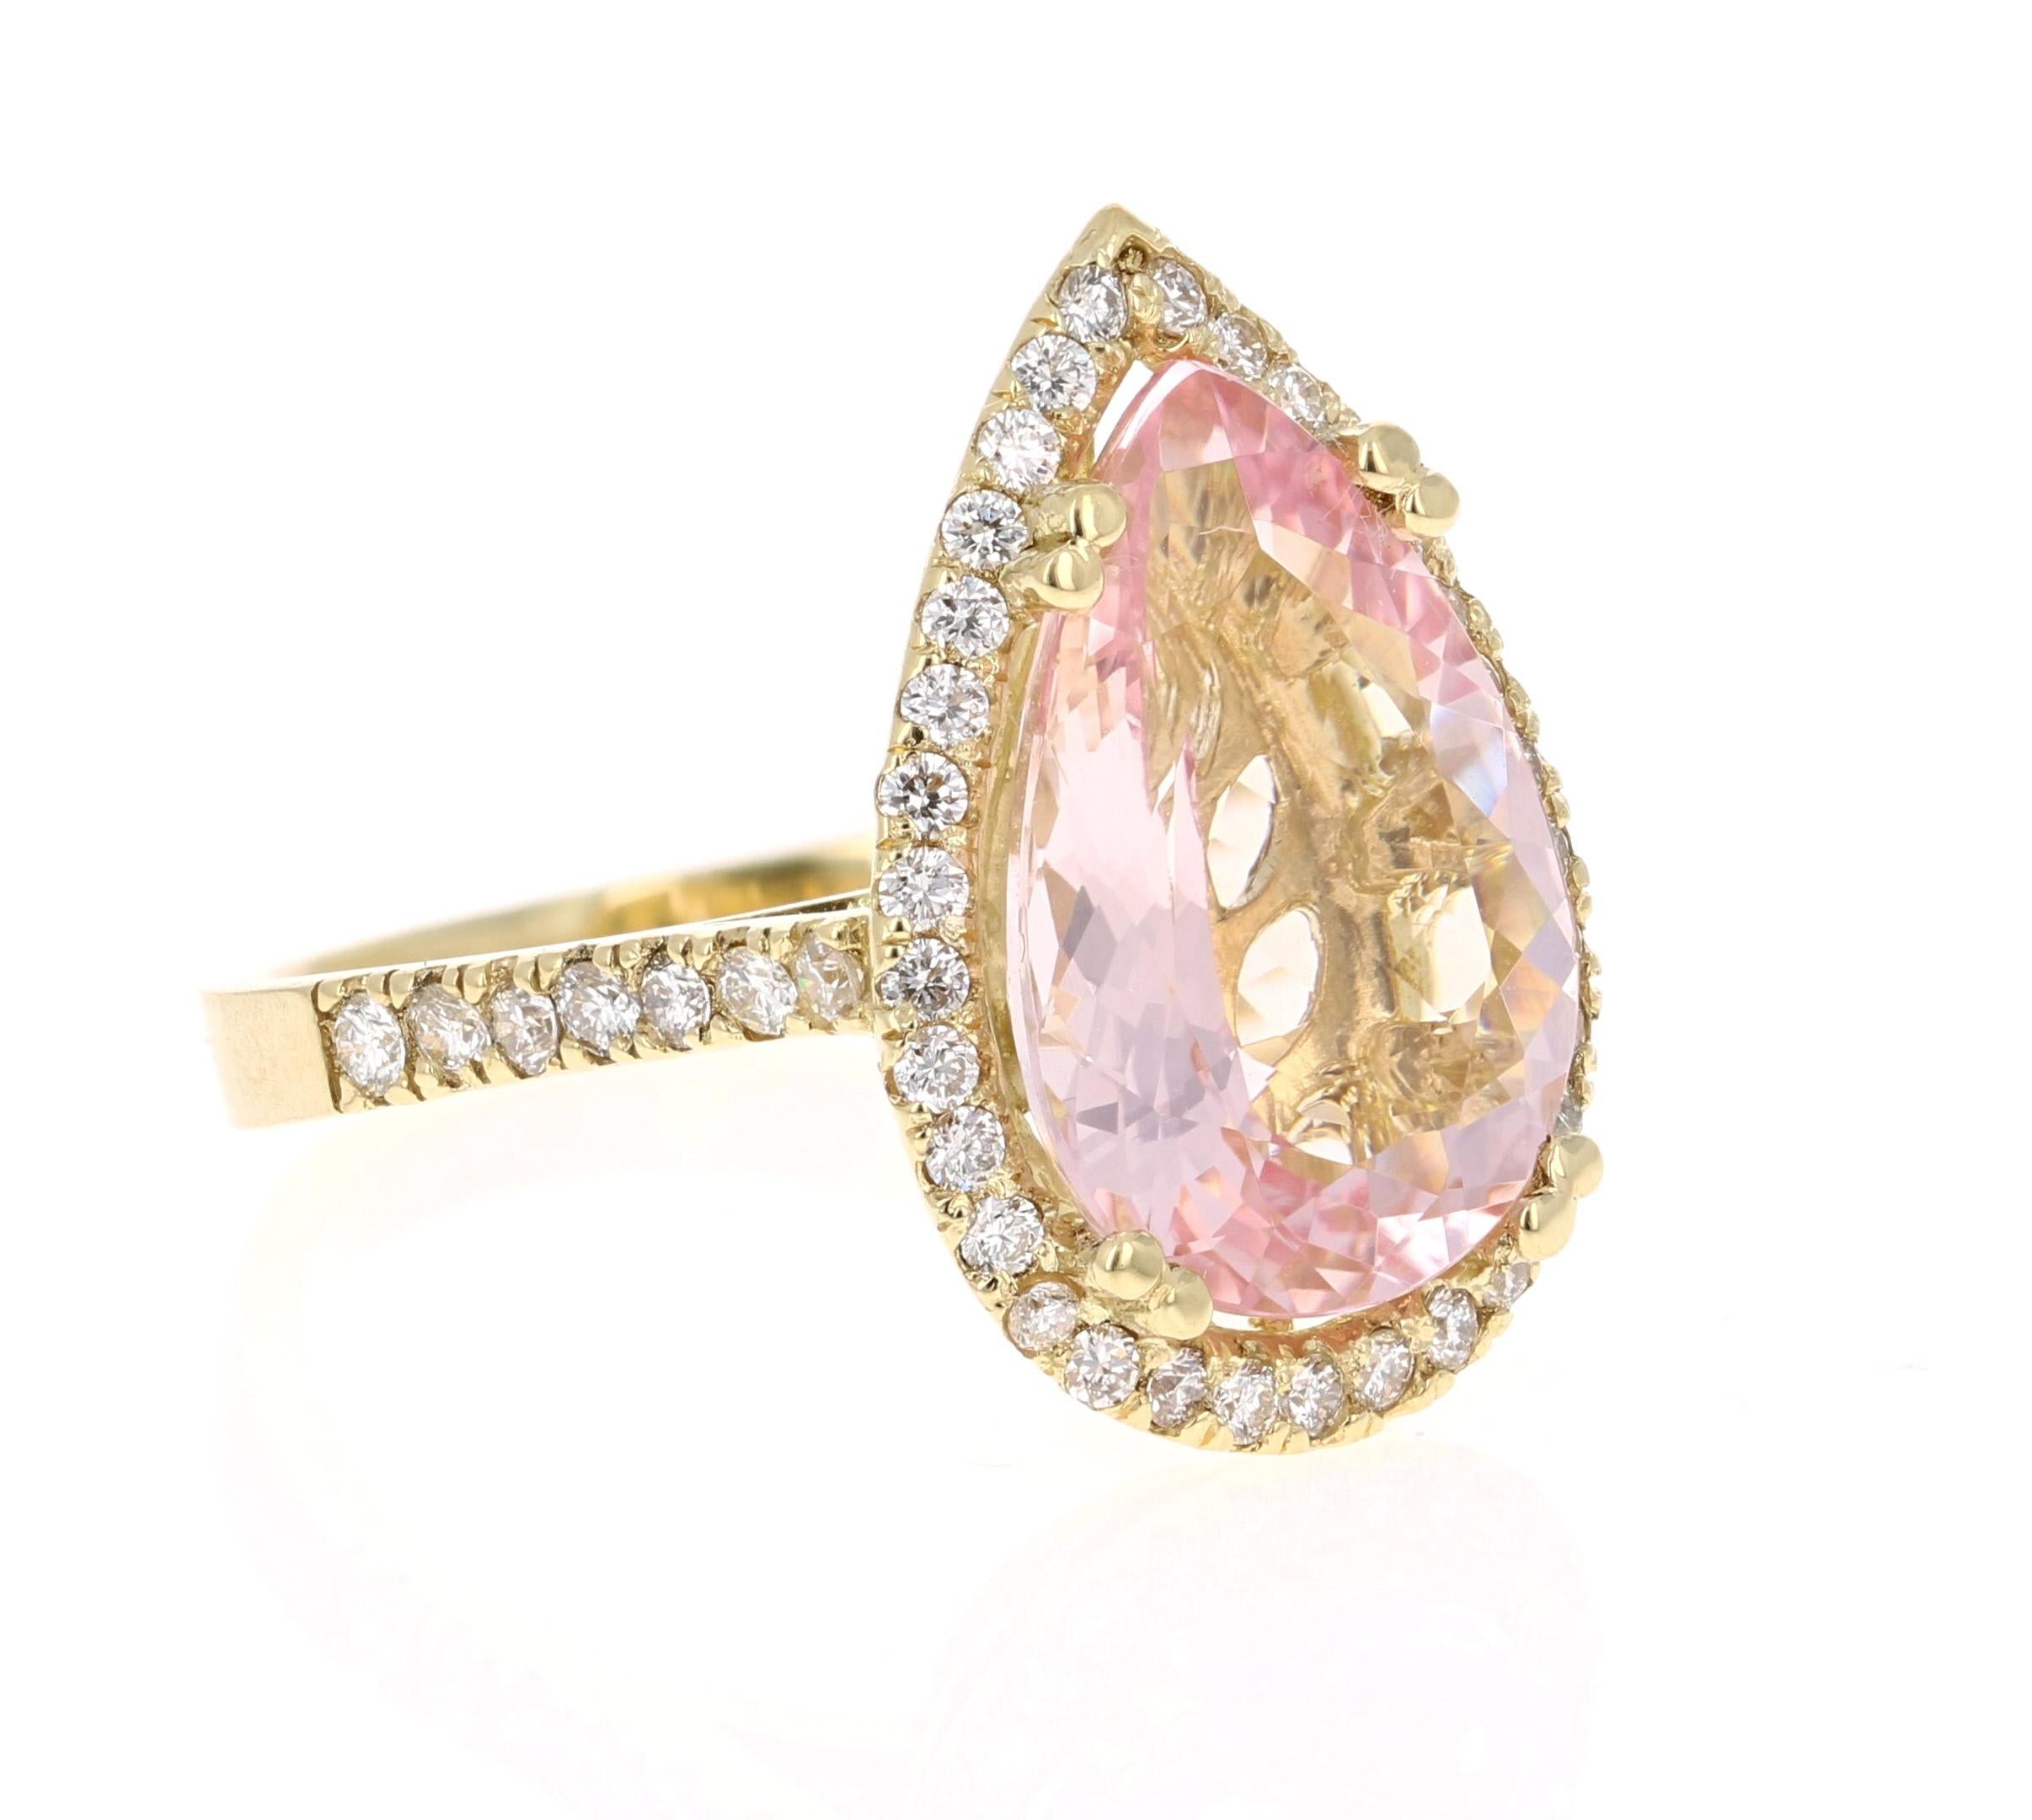 This Morganite ring has a gorgeous 5.59 Carat Pear Cut Pink Morganite and is surrounded by a halo of 49 Round Cut Diamonds that weigh 0.72 Carats.  The diamonds have a clarity and color of VS-H. The total carat weight of the ring is 6.31 Carats.